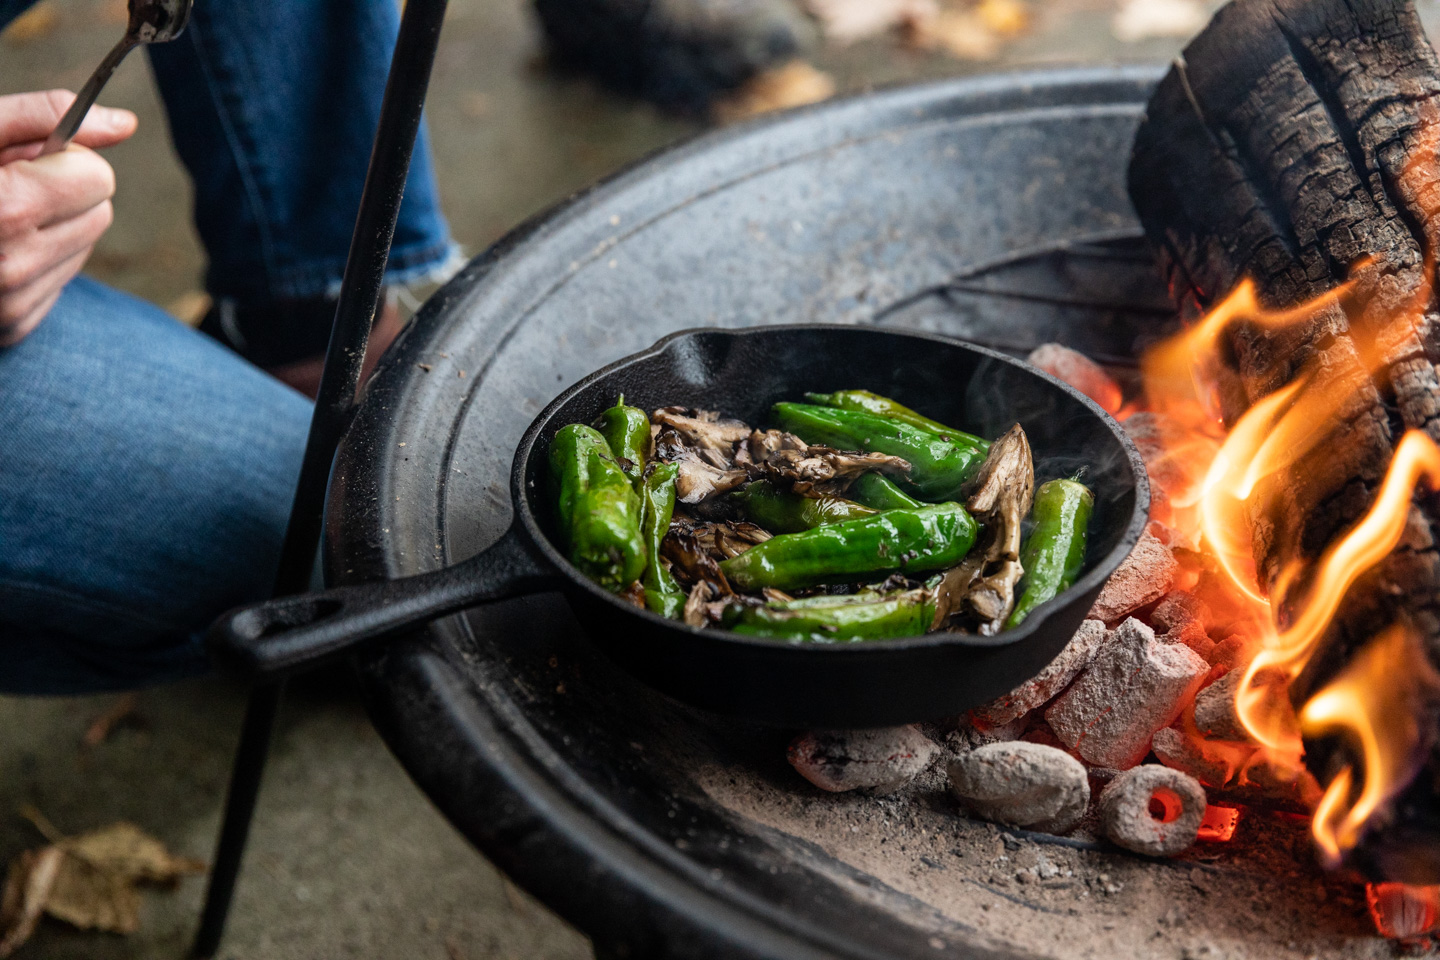 food photographer - peppers being cooked on an open flame at the Milkweed Inn